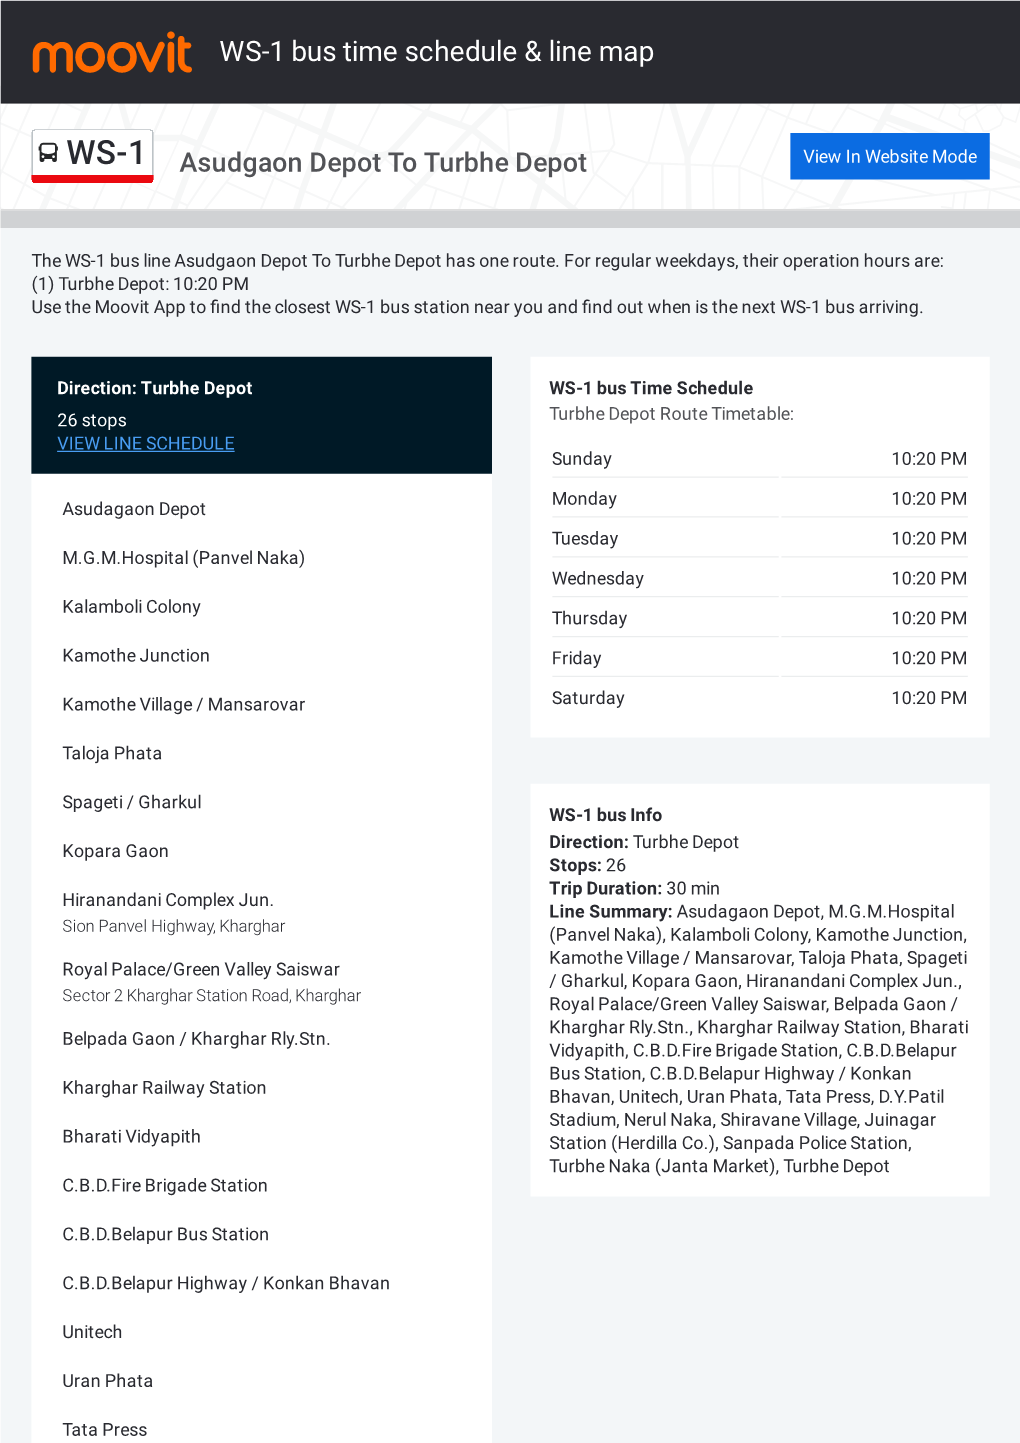 WS-1 Bus Time Schedule & Line Route